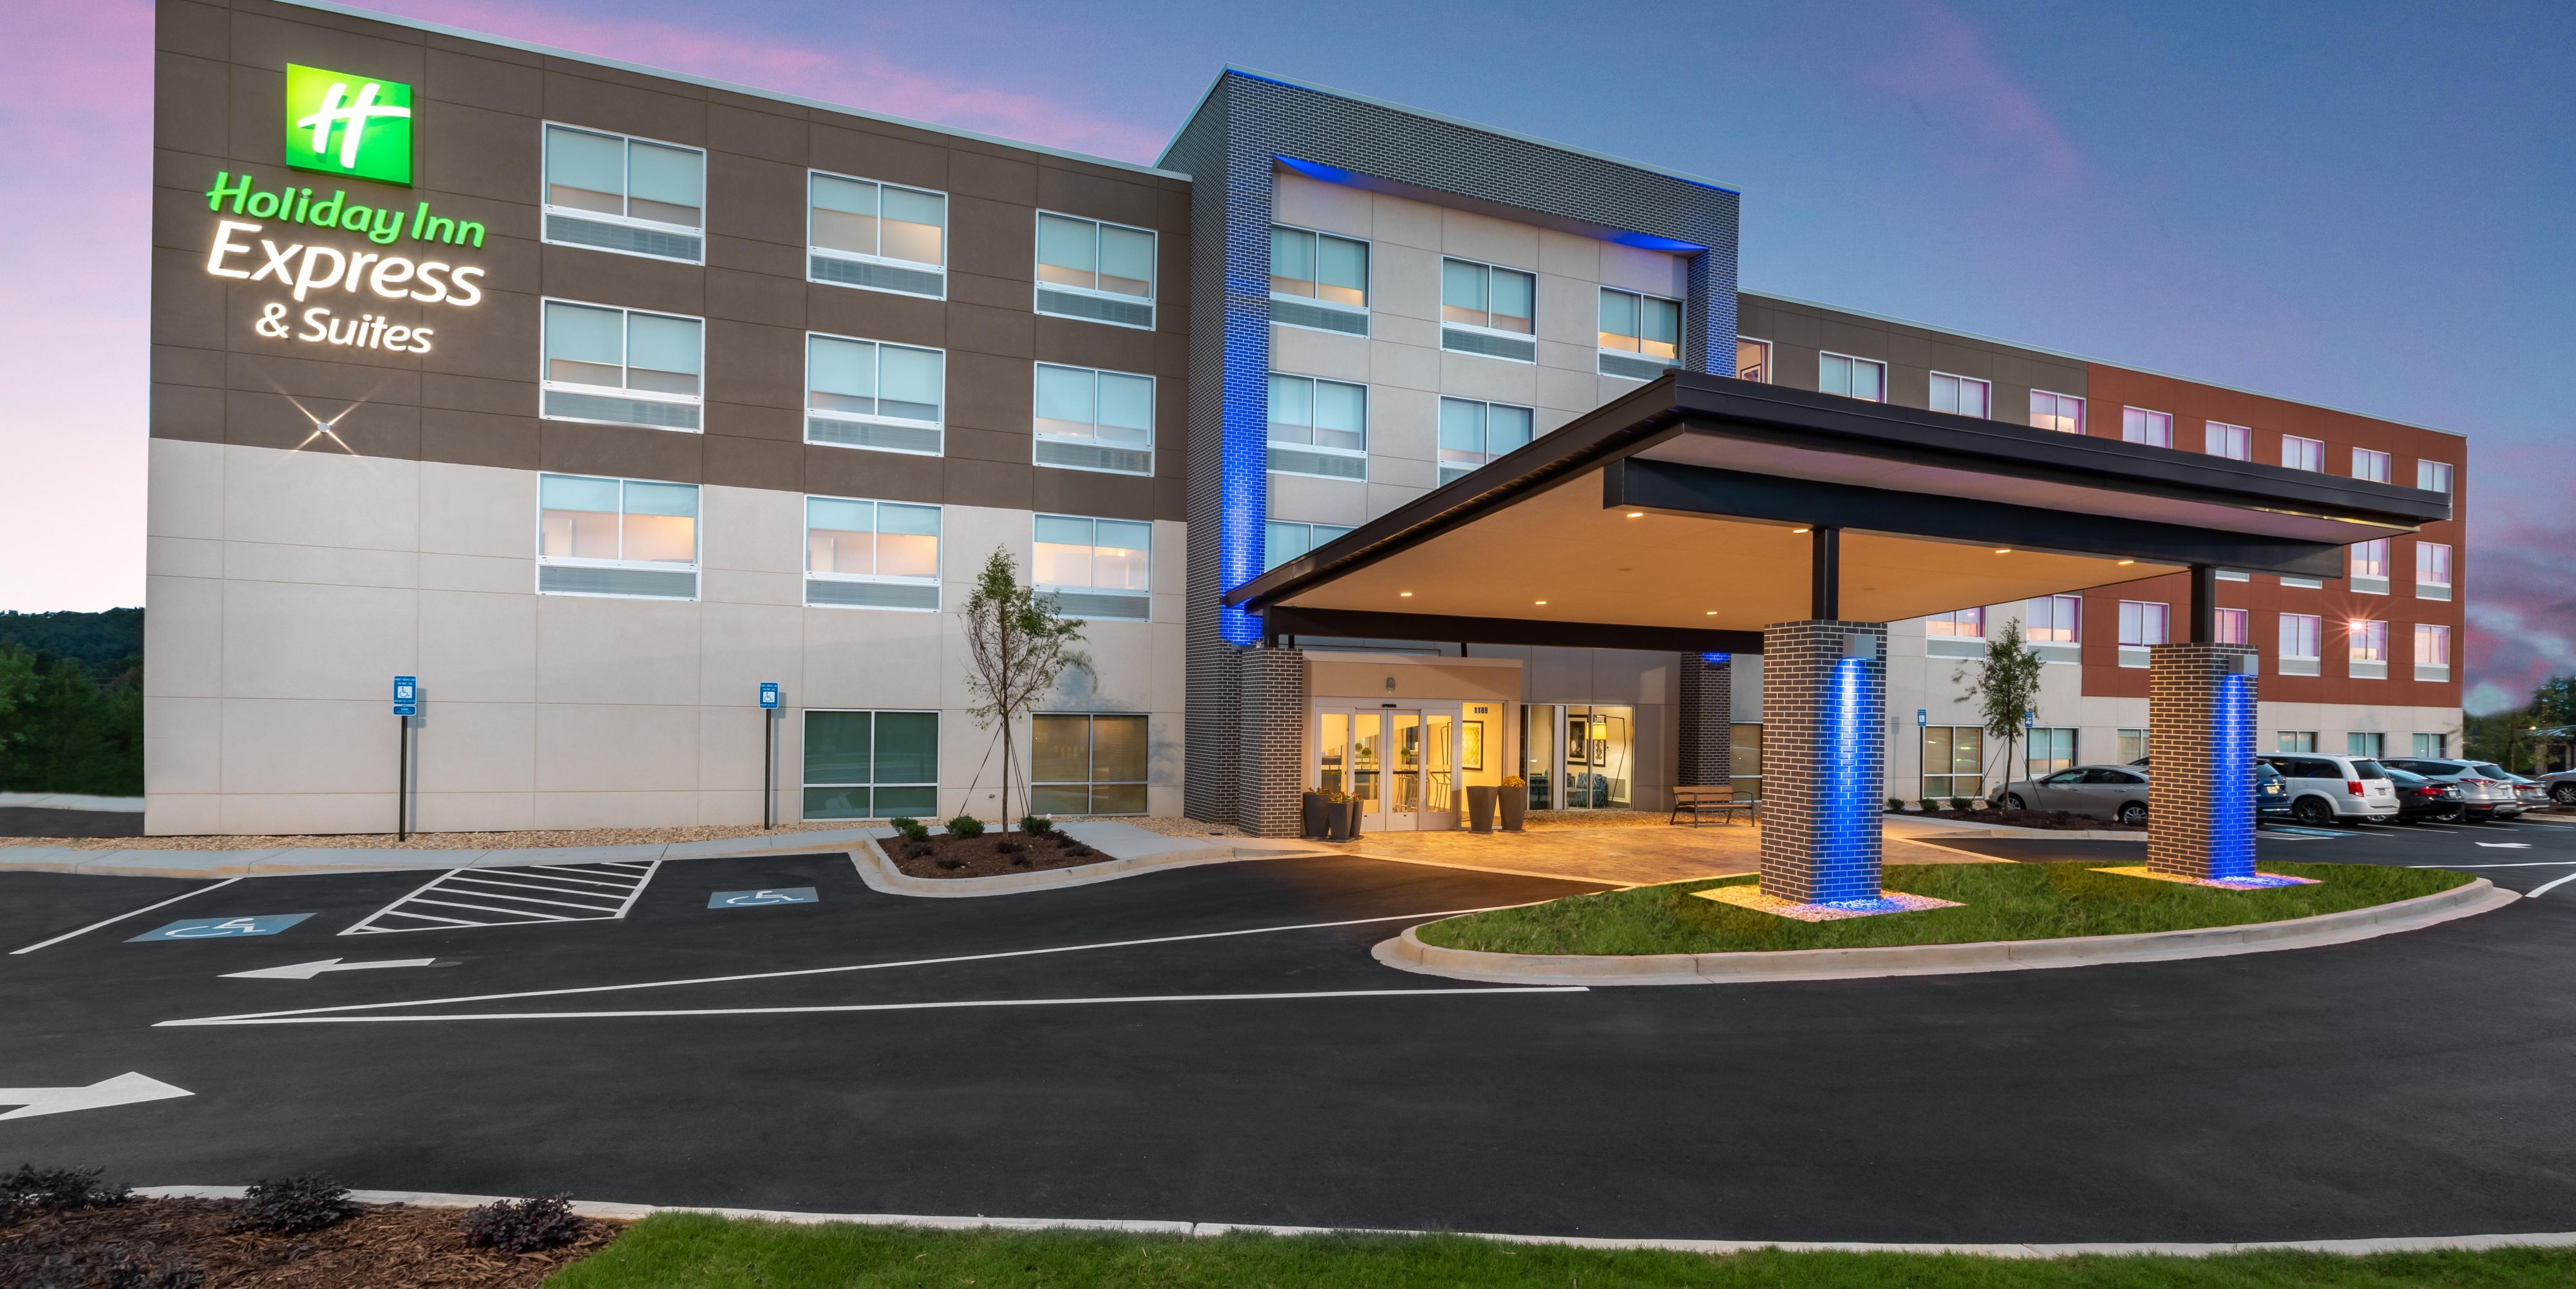 Our beautiful new hotel can accommodate your wedding guest room needs.  We are located close to downtown Gainesville where your guests can enjoy all Gainesville has to offer.  Close to theaters, restaurants, museums, and so much more.